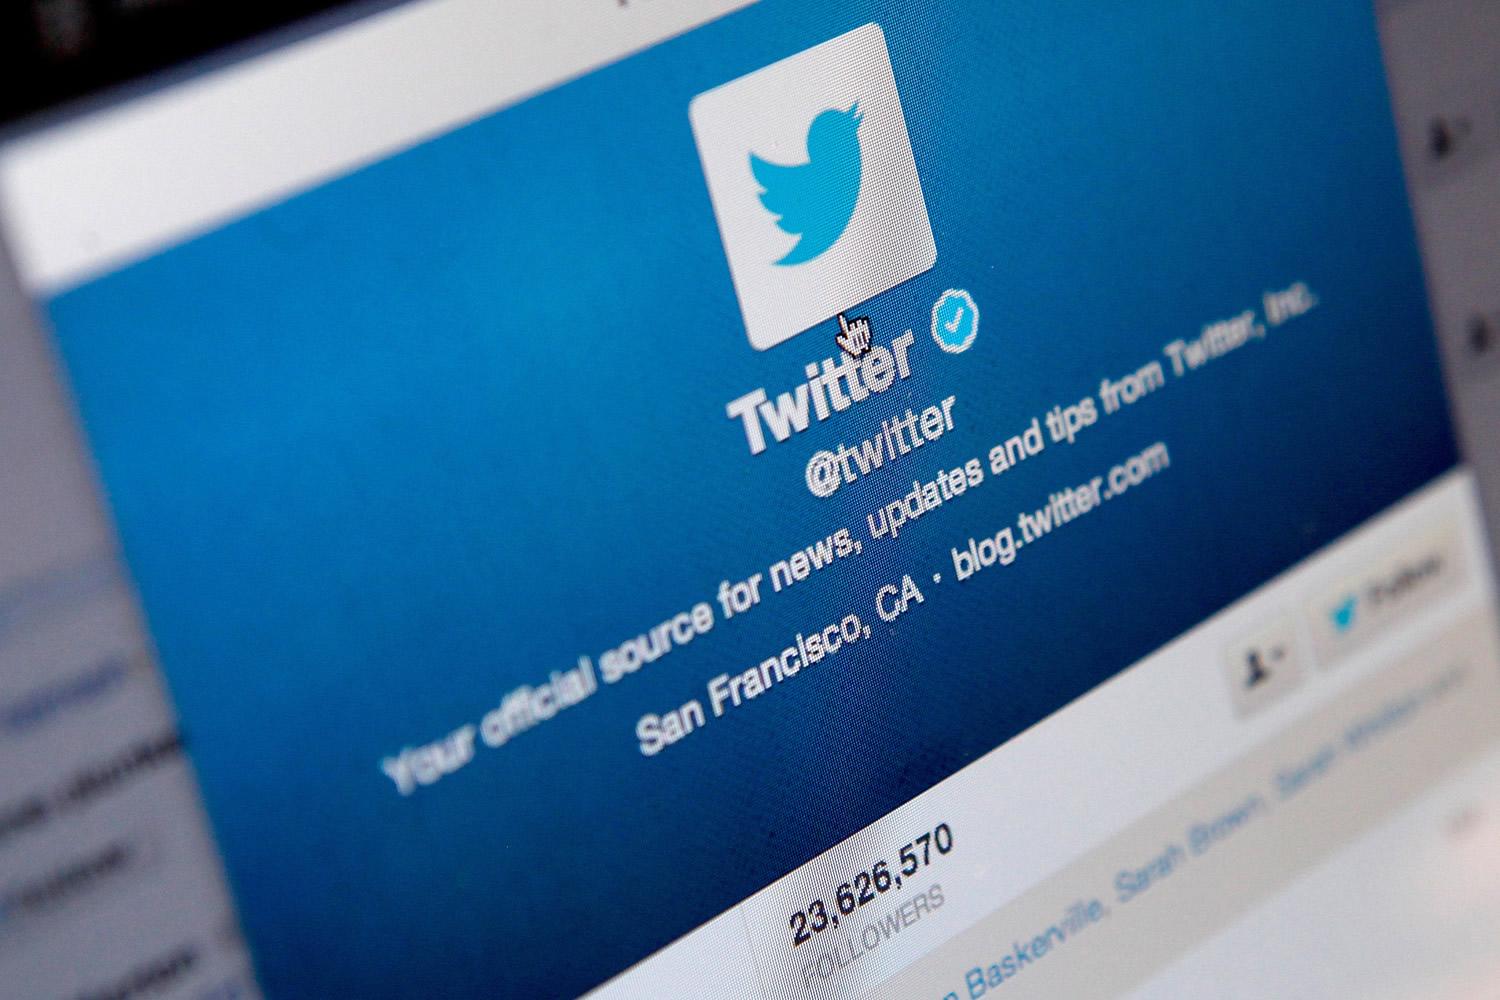 Twitter and mit collaborate to analyze your tweets